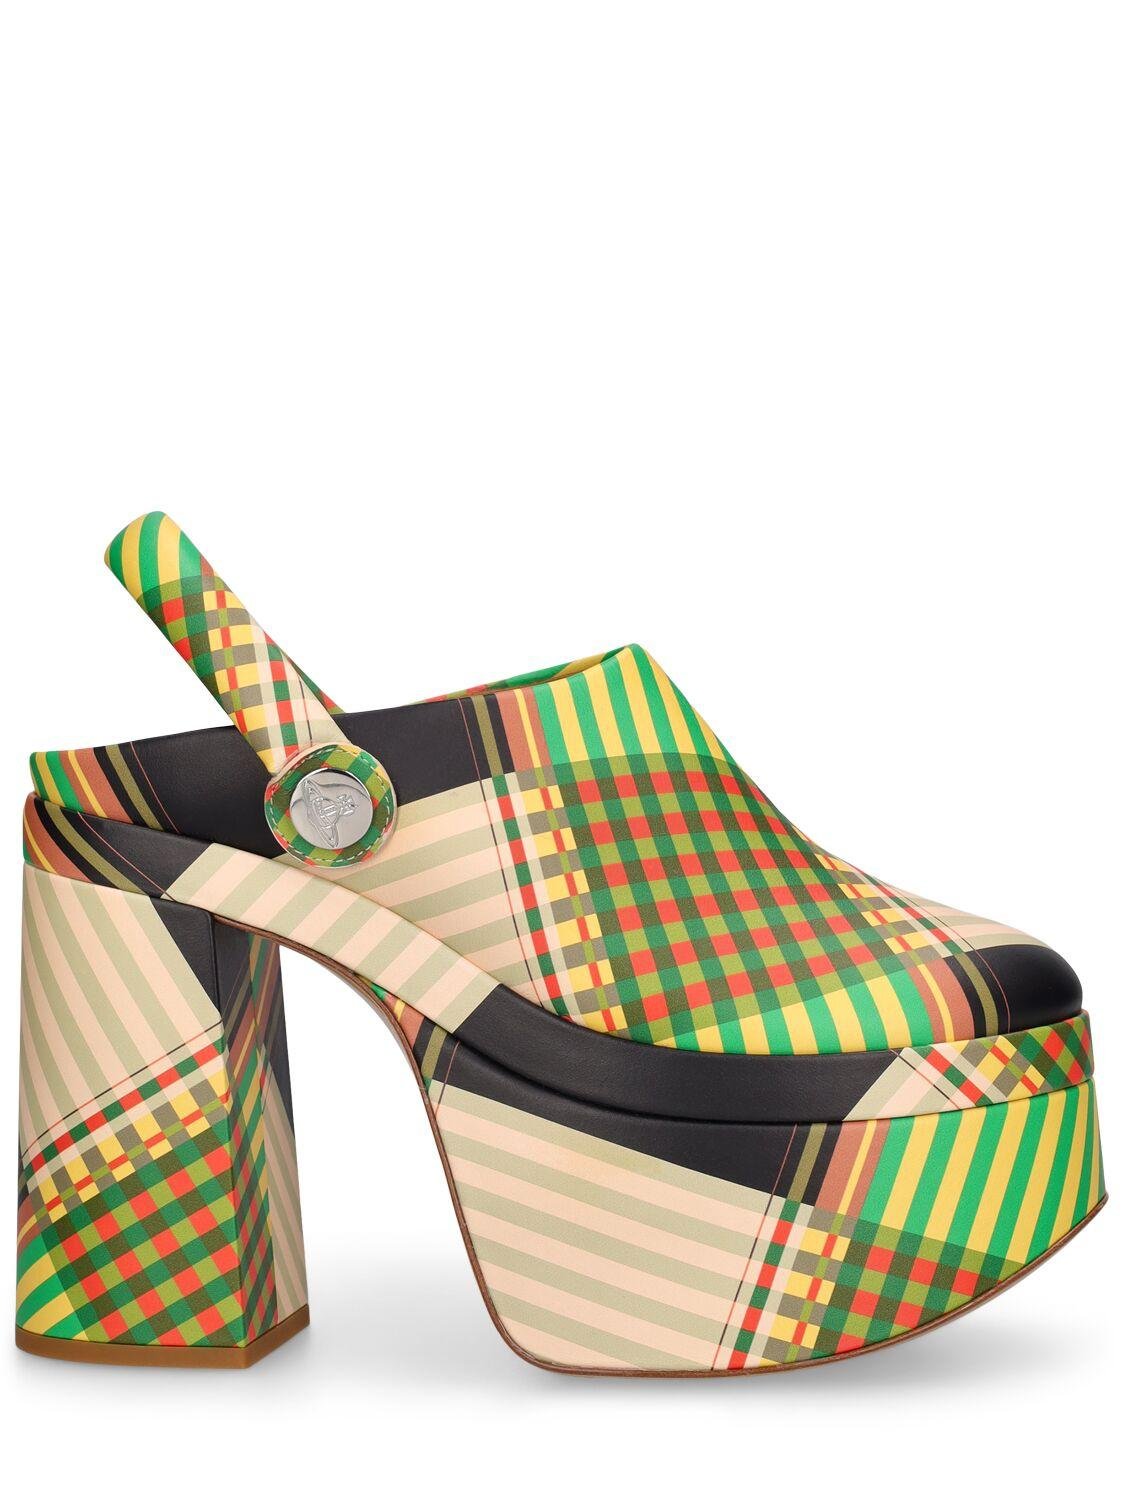 115mm Swamp Leather Clogs by VIVIENNE WESTWOOD